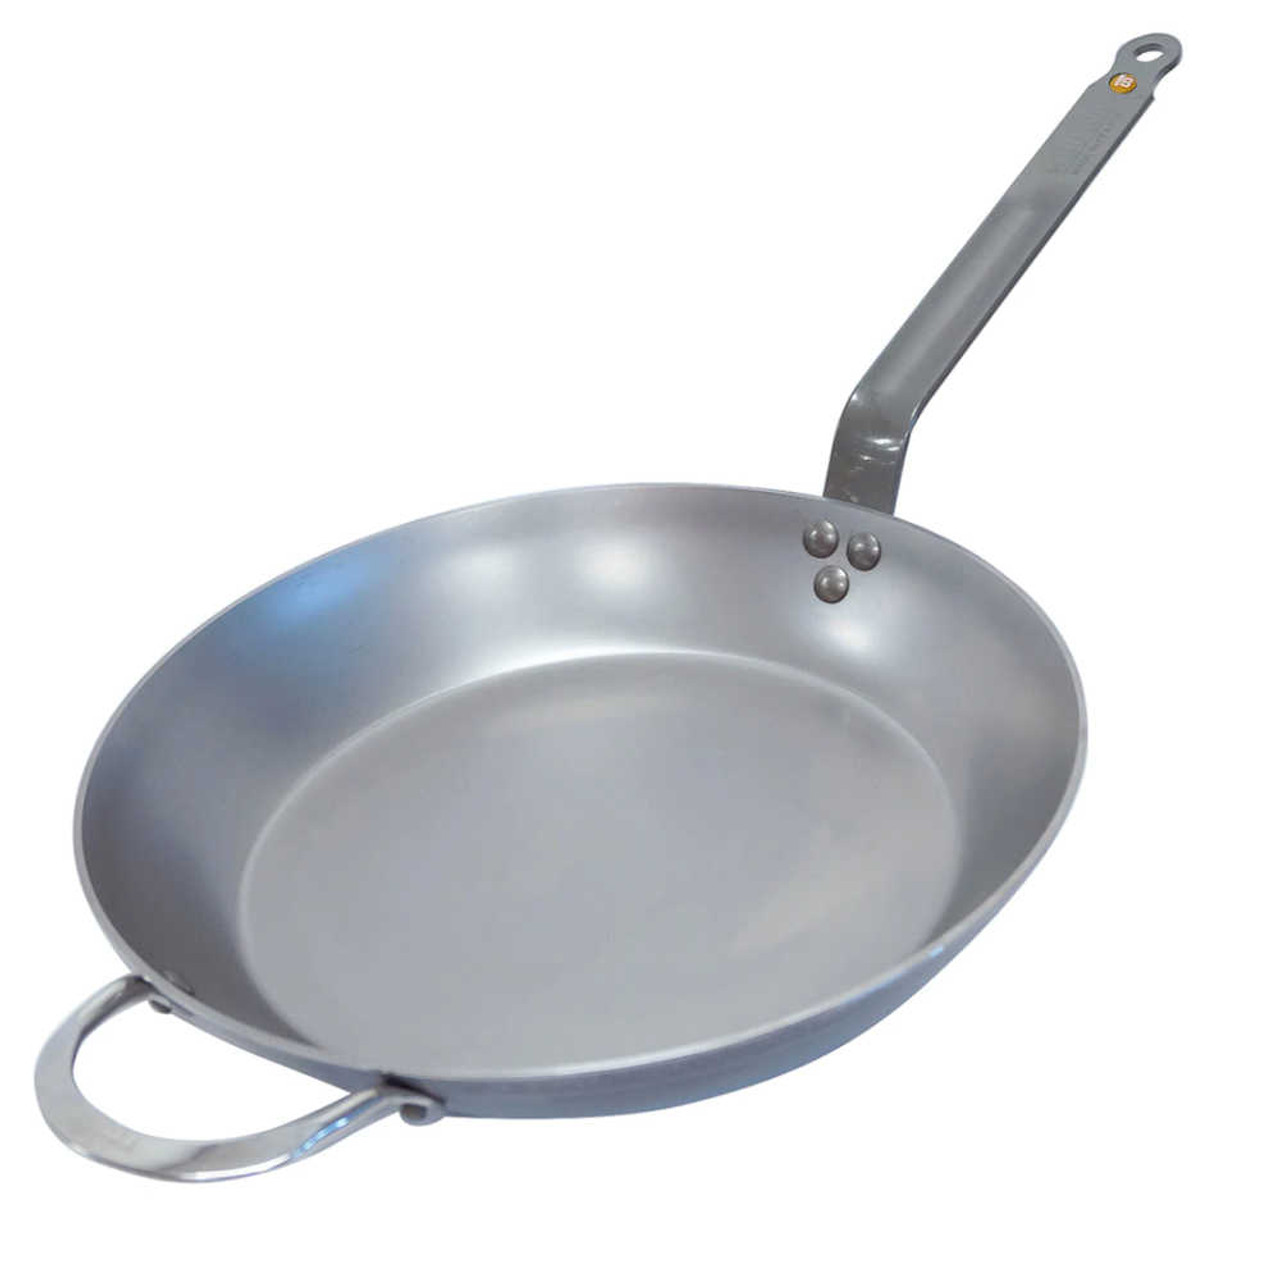 https://cdn11.bigcommerce.com/s-hccytny0od/images/stencil/1280x1280/products/4768/19444/de_Buyer_Mineral_B_Carbon_Steel_Fry_Pan_2__43767.1653095483.jpg?c=2?imbypass=on